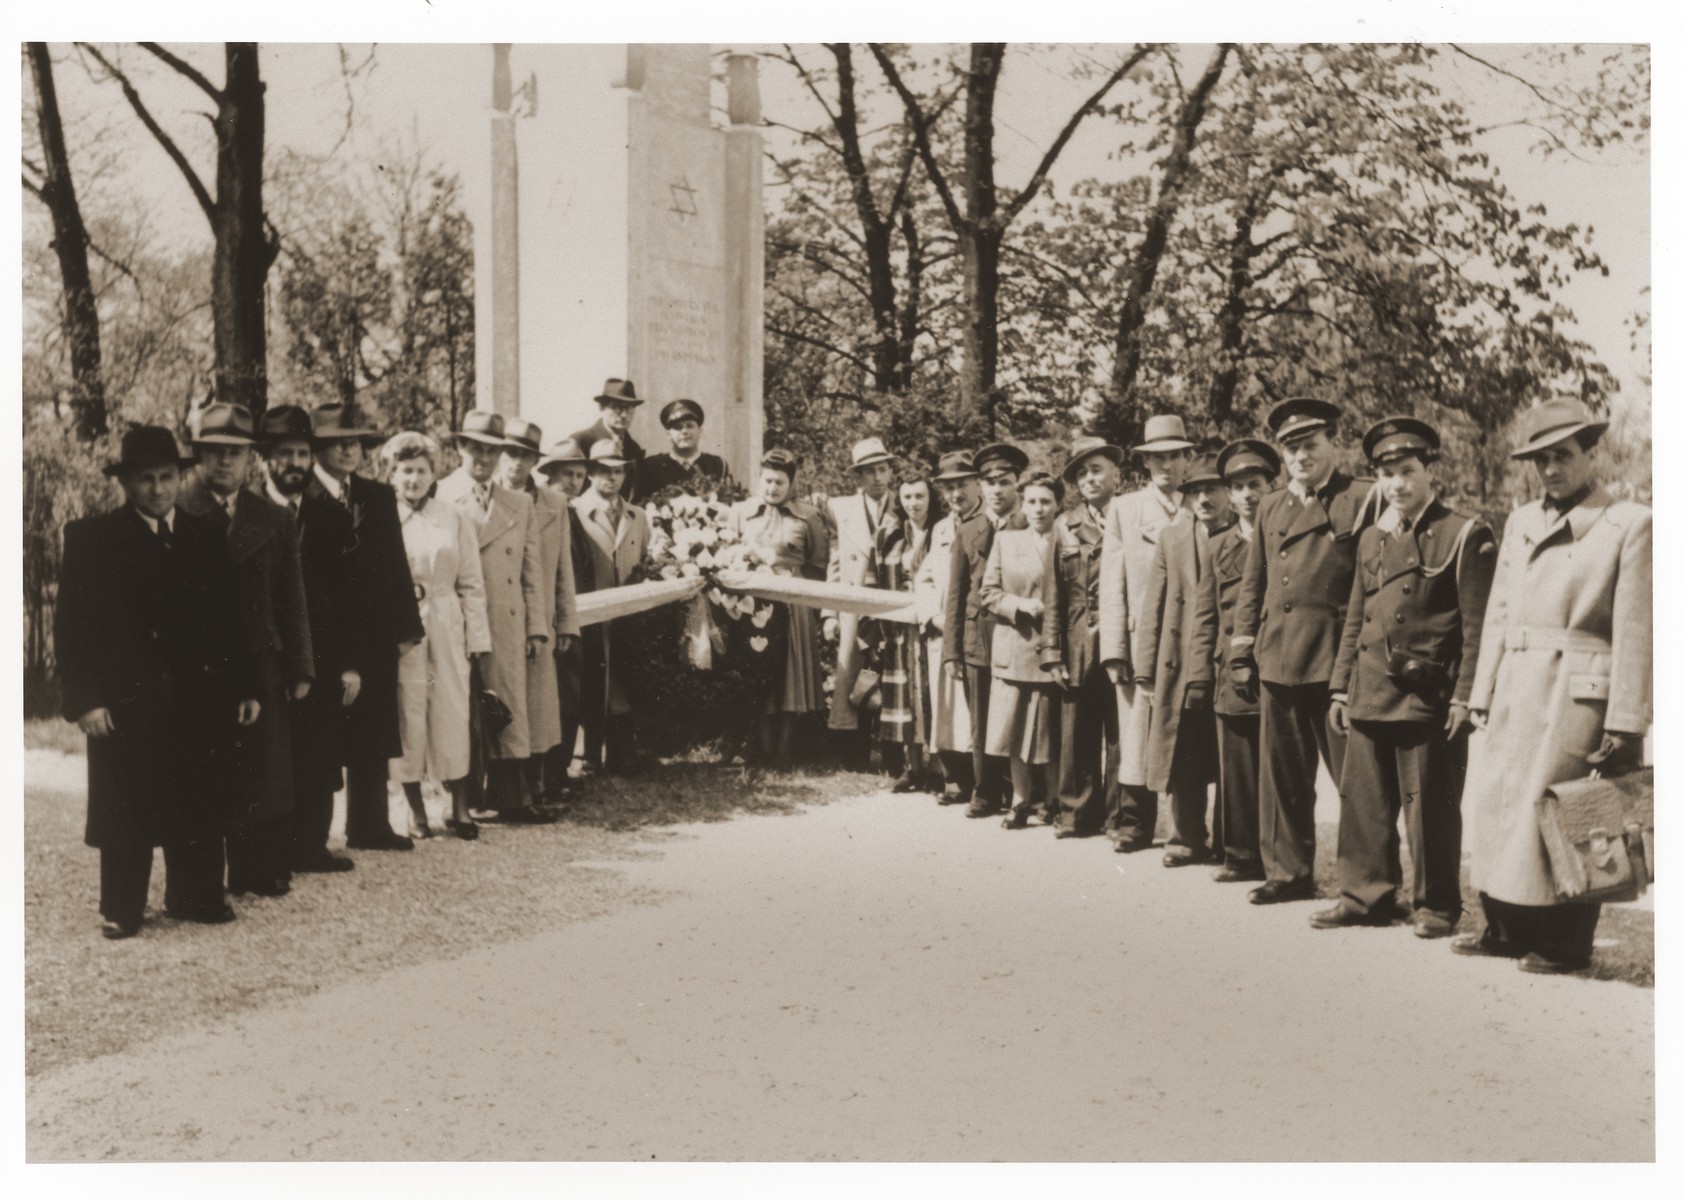 Jewish DPs from the Lechfeld displaced persons camp pose with a wreath in front of the memorial to Jewish victims at the Dachau concentration camp.